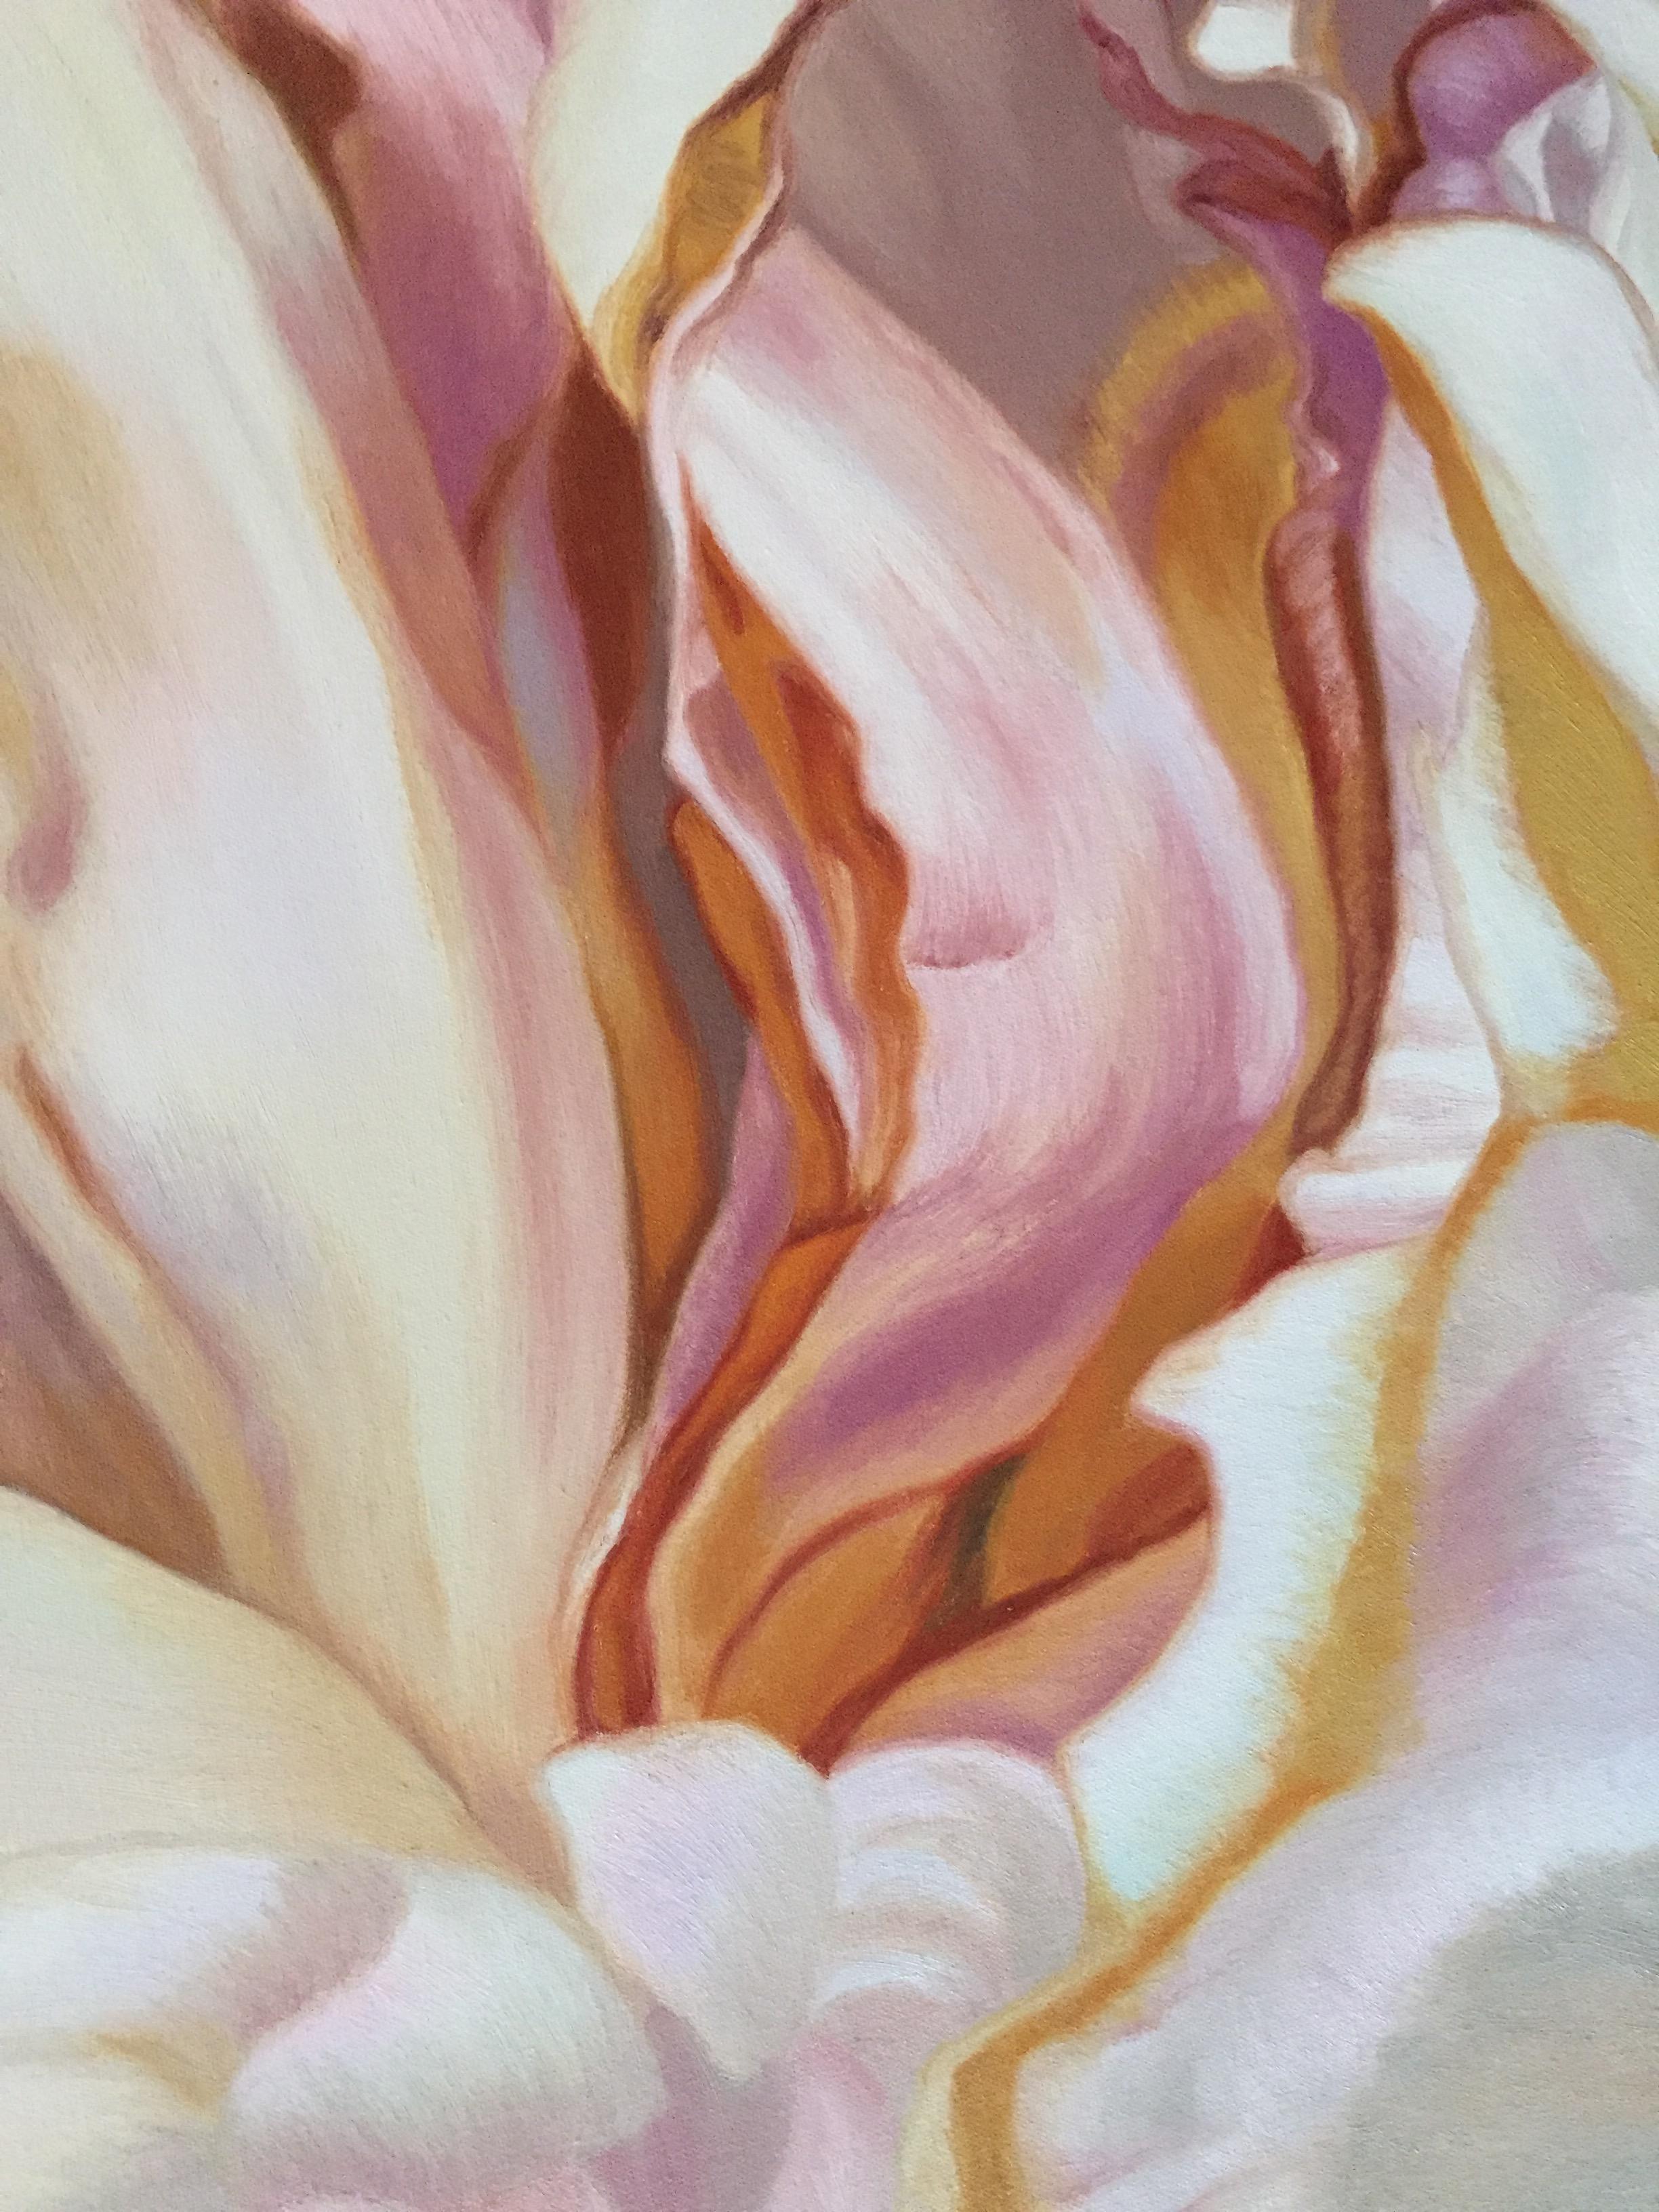 “Becky’s Peony”, Oil on Museum-Wrap Canvas, 48x48x2.5 inches, 2019, Image wrap painted around the edge, No framing needed, Ready to Hang, Signed on the Back, Certificate of Authenticity Included. Ships in a wooden crate.


About artist:
Born in Utah